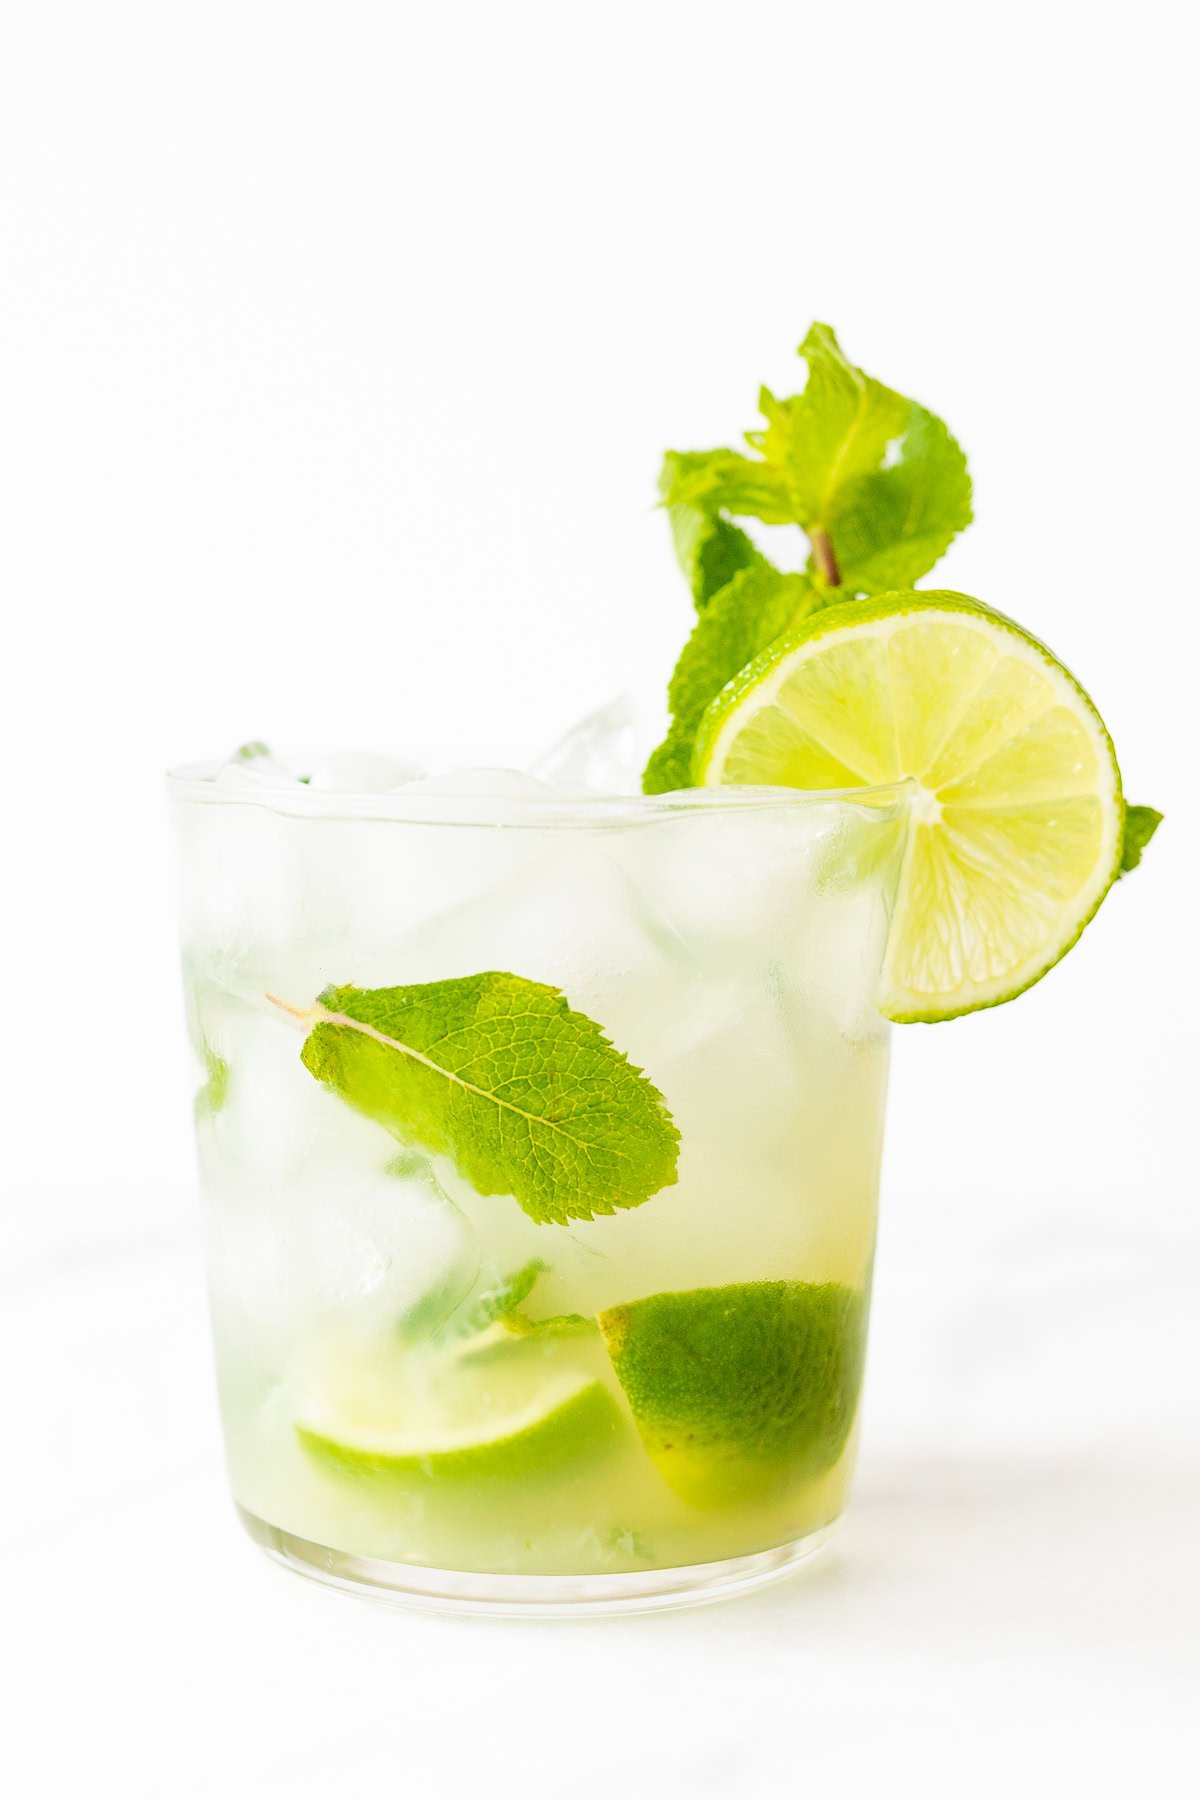 A refreshing skinny mojito cocktail with lime slices and mint leaves in a clear glass against a white background.